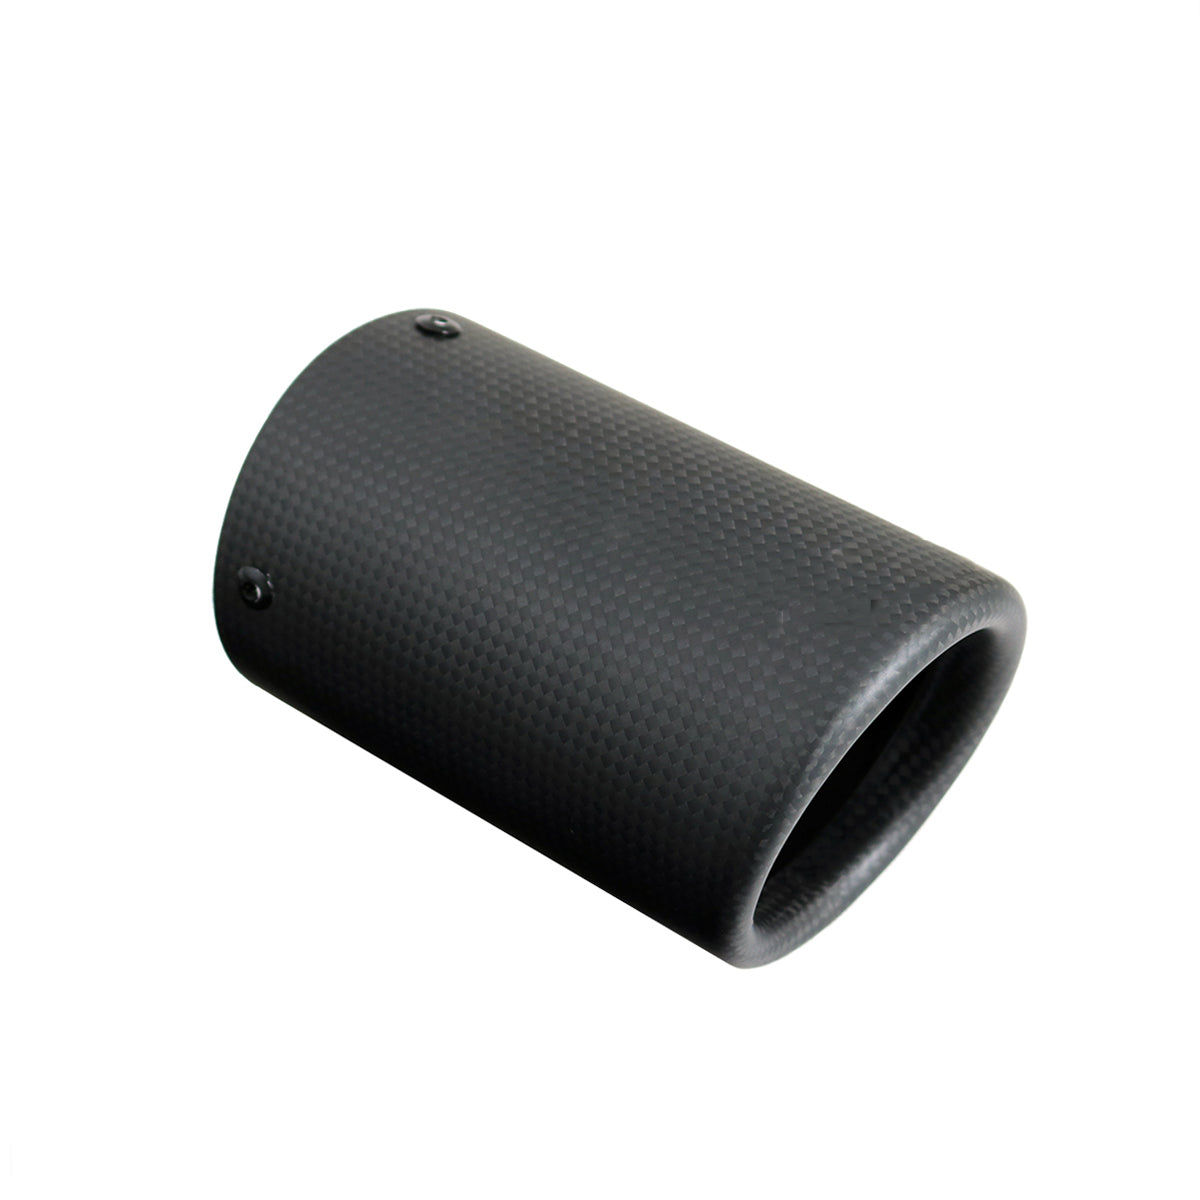 BMW F Series Carbon Fibre Replacement Exhaust Tip Covers - To fit the twin exit exhausts on the F Series BMW Models. We have been asked to produce this product for a while, and we have finally come up with a solution that all BMW owners will love. Our 2*2 Twill Carbon Fibre Exhaust Tip Covers come with an integrated OEM Style circlip holding bracket pre-mounted onto the inside of the exhaust tip to make the installation process as simple as replacing your original exhaust tips. 